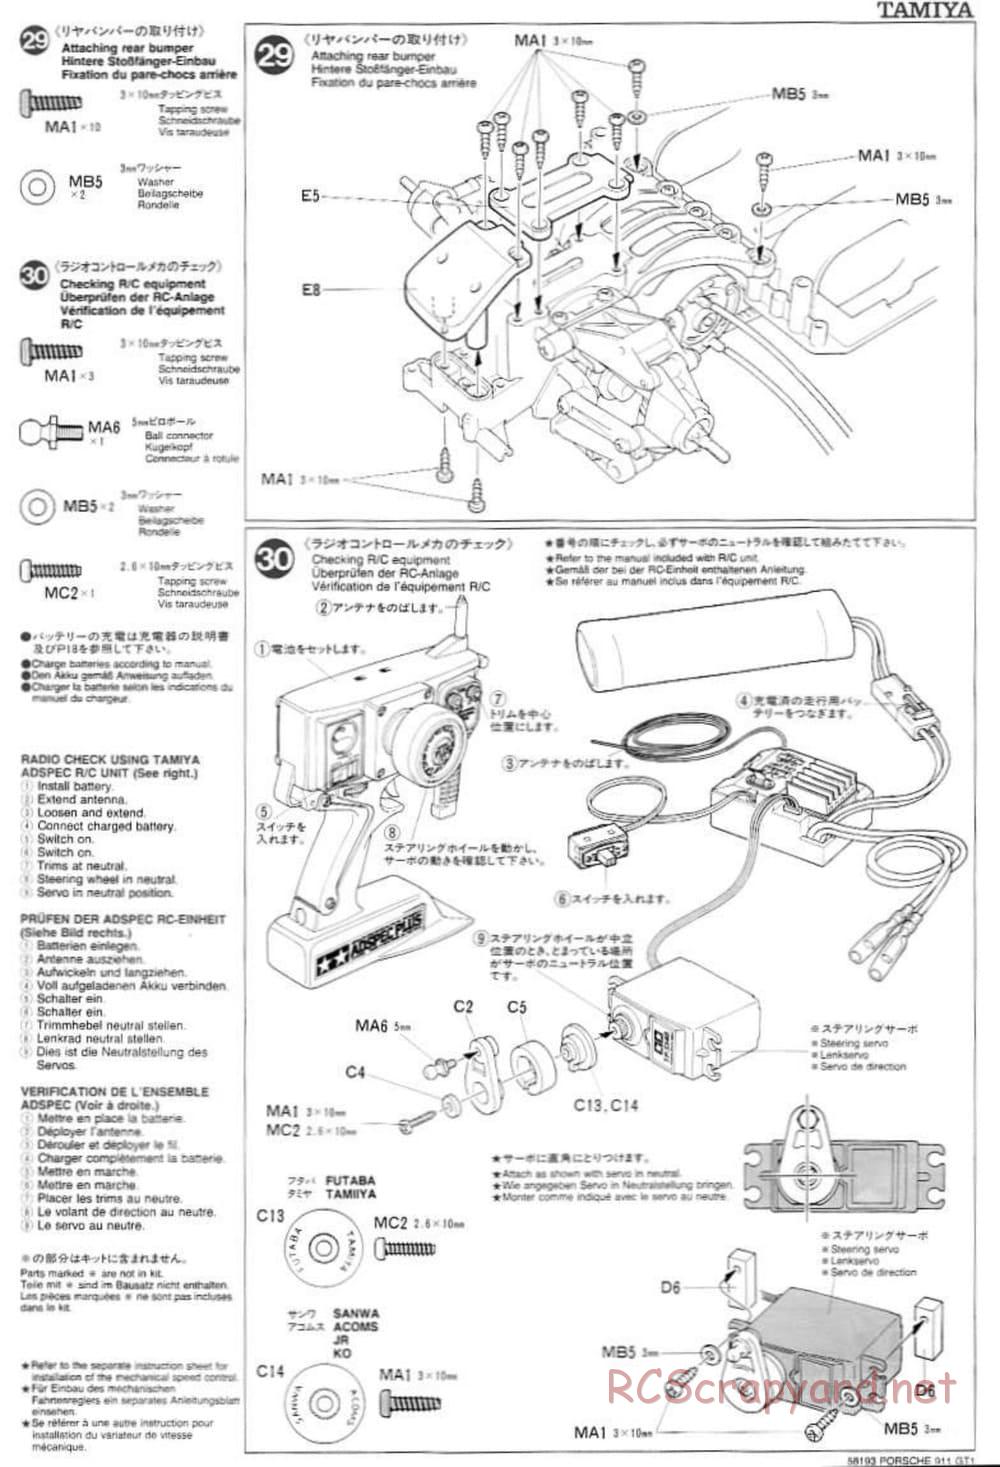 Tamiya - Porsche 911 GT1 - TA-03RS Chassis - Manual - Page 15